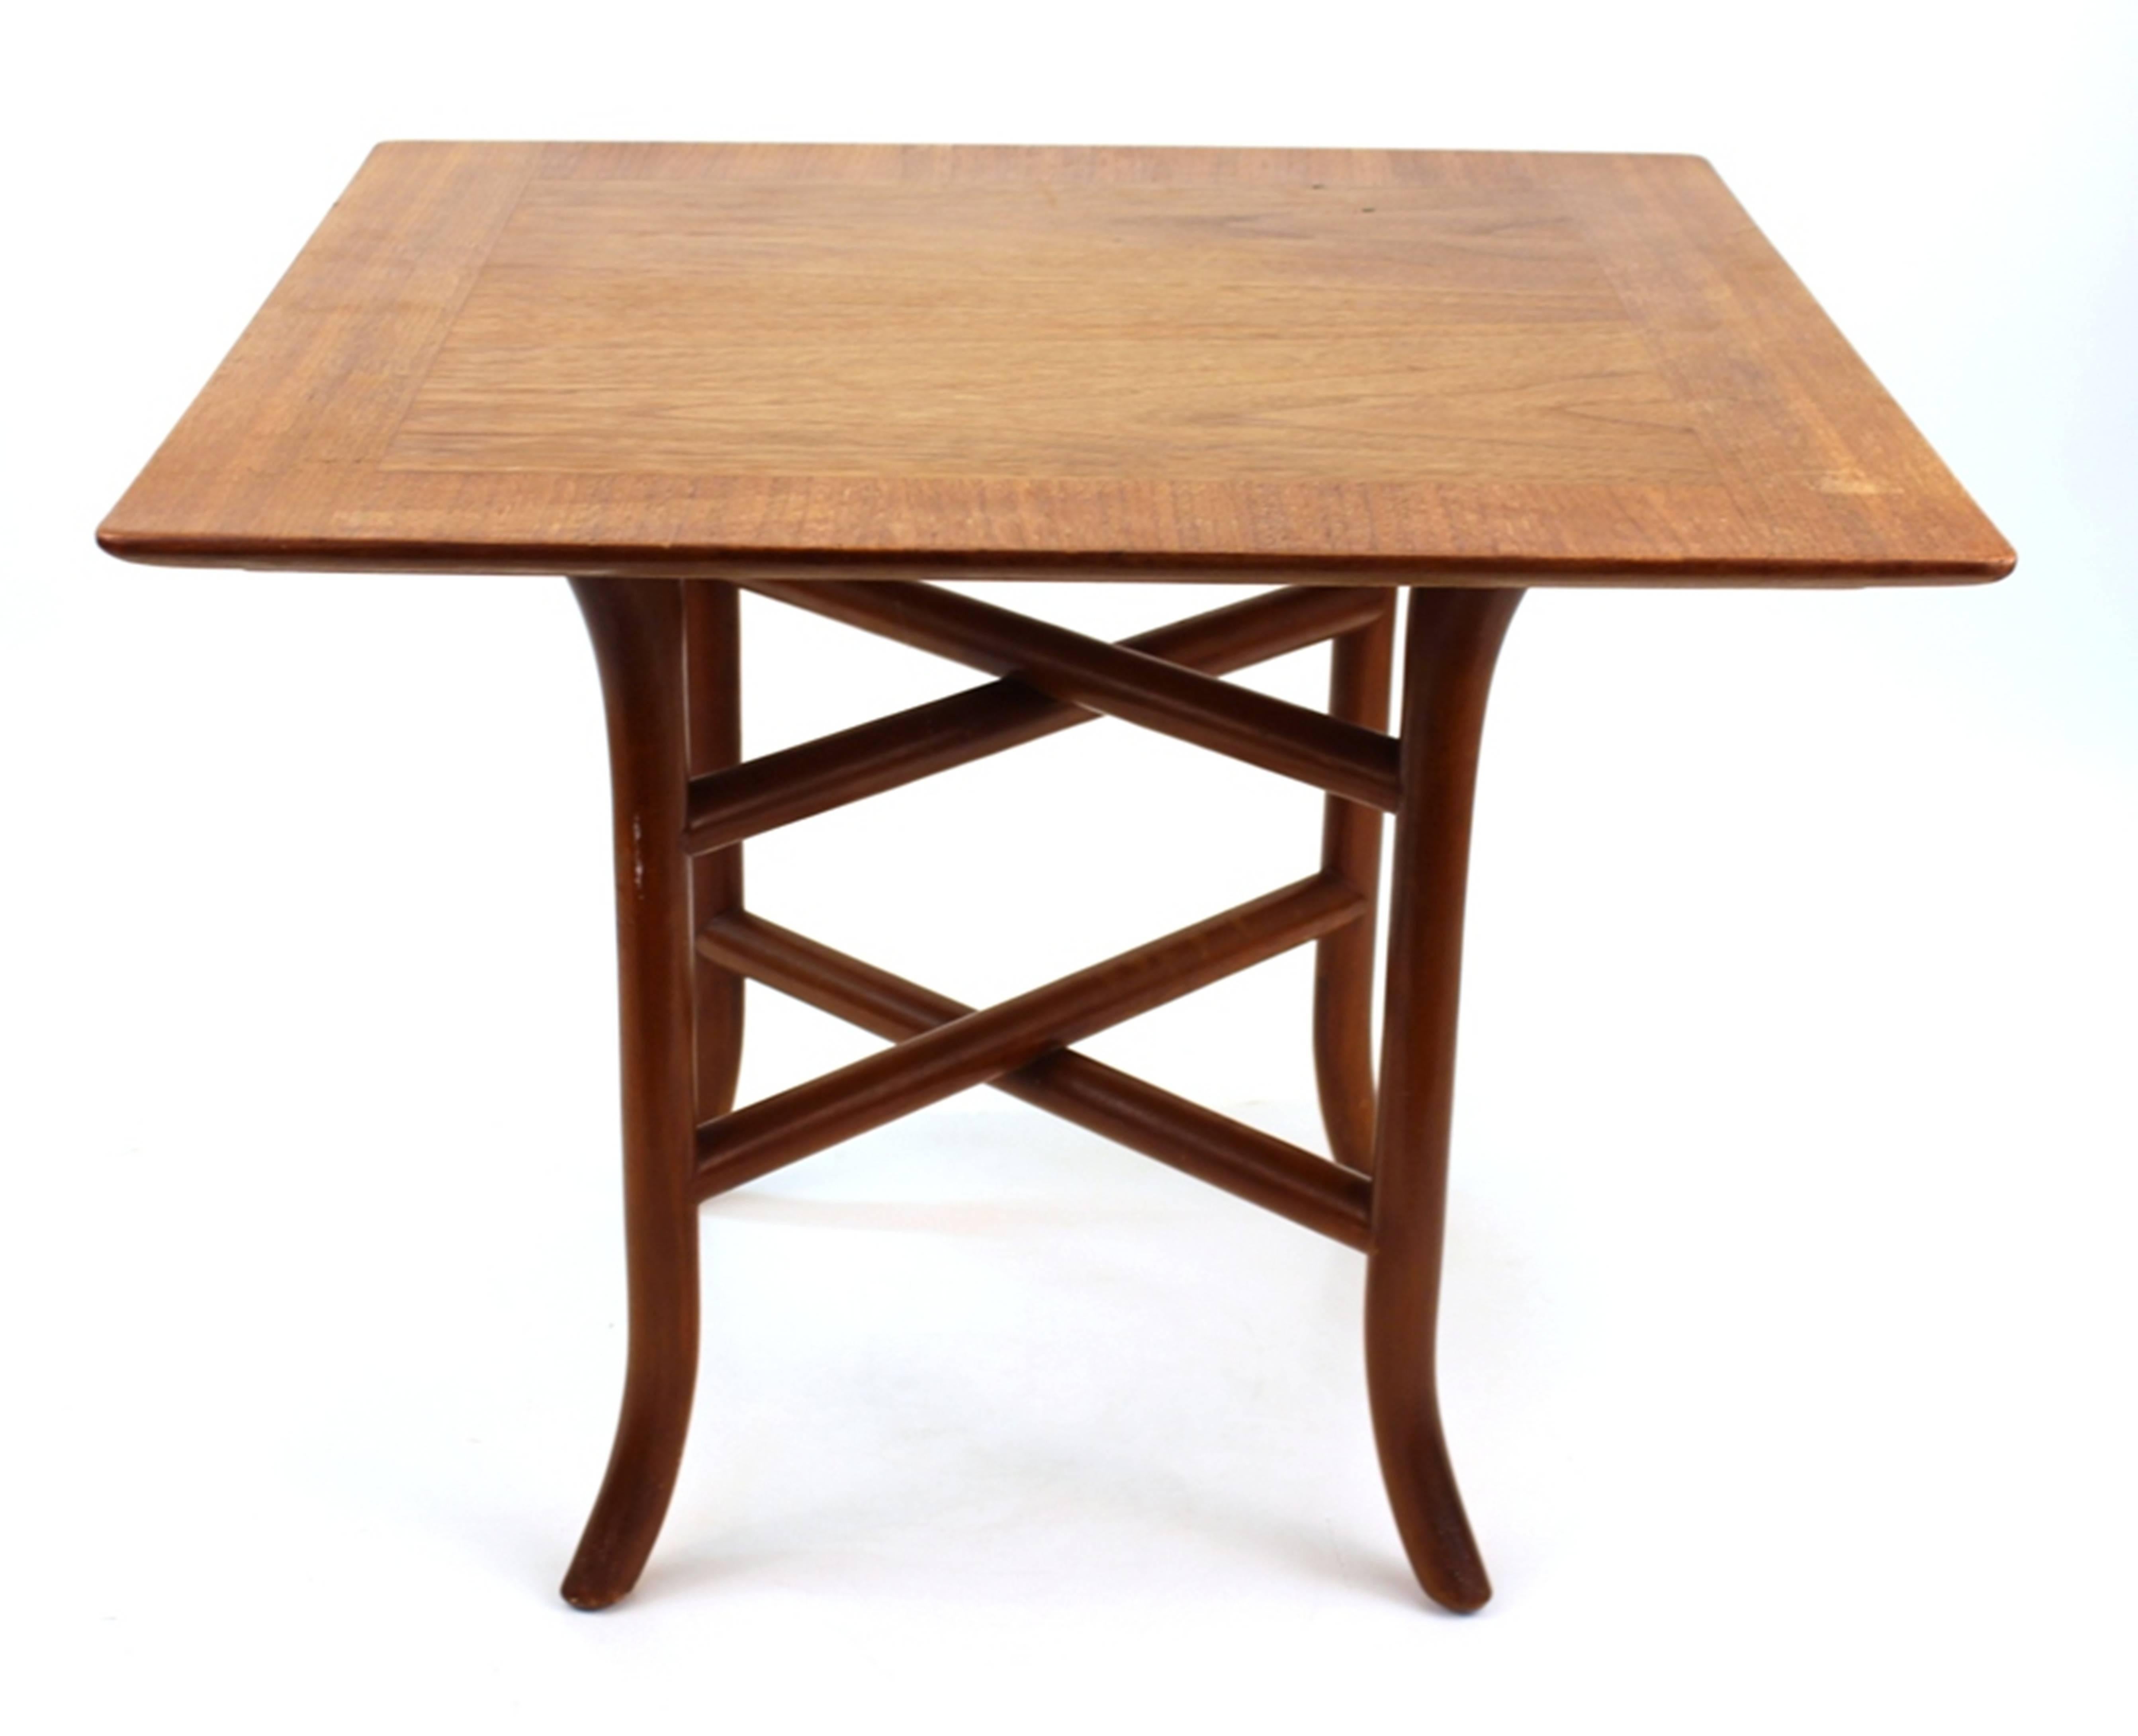 T.H. Robsjohn-Gibbings side table for Widdicomb. Produced with a square top seated on four legs with curved bases. Features two pairs of crossed trestles in between the table legs. Includes the original Widdicomb label and serial number stamps